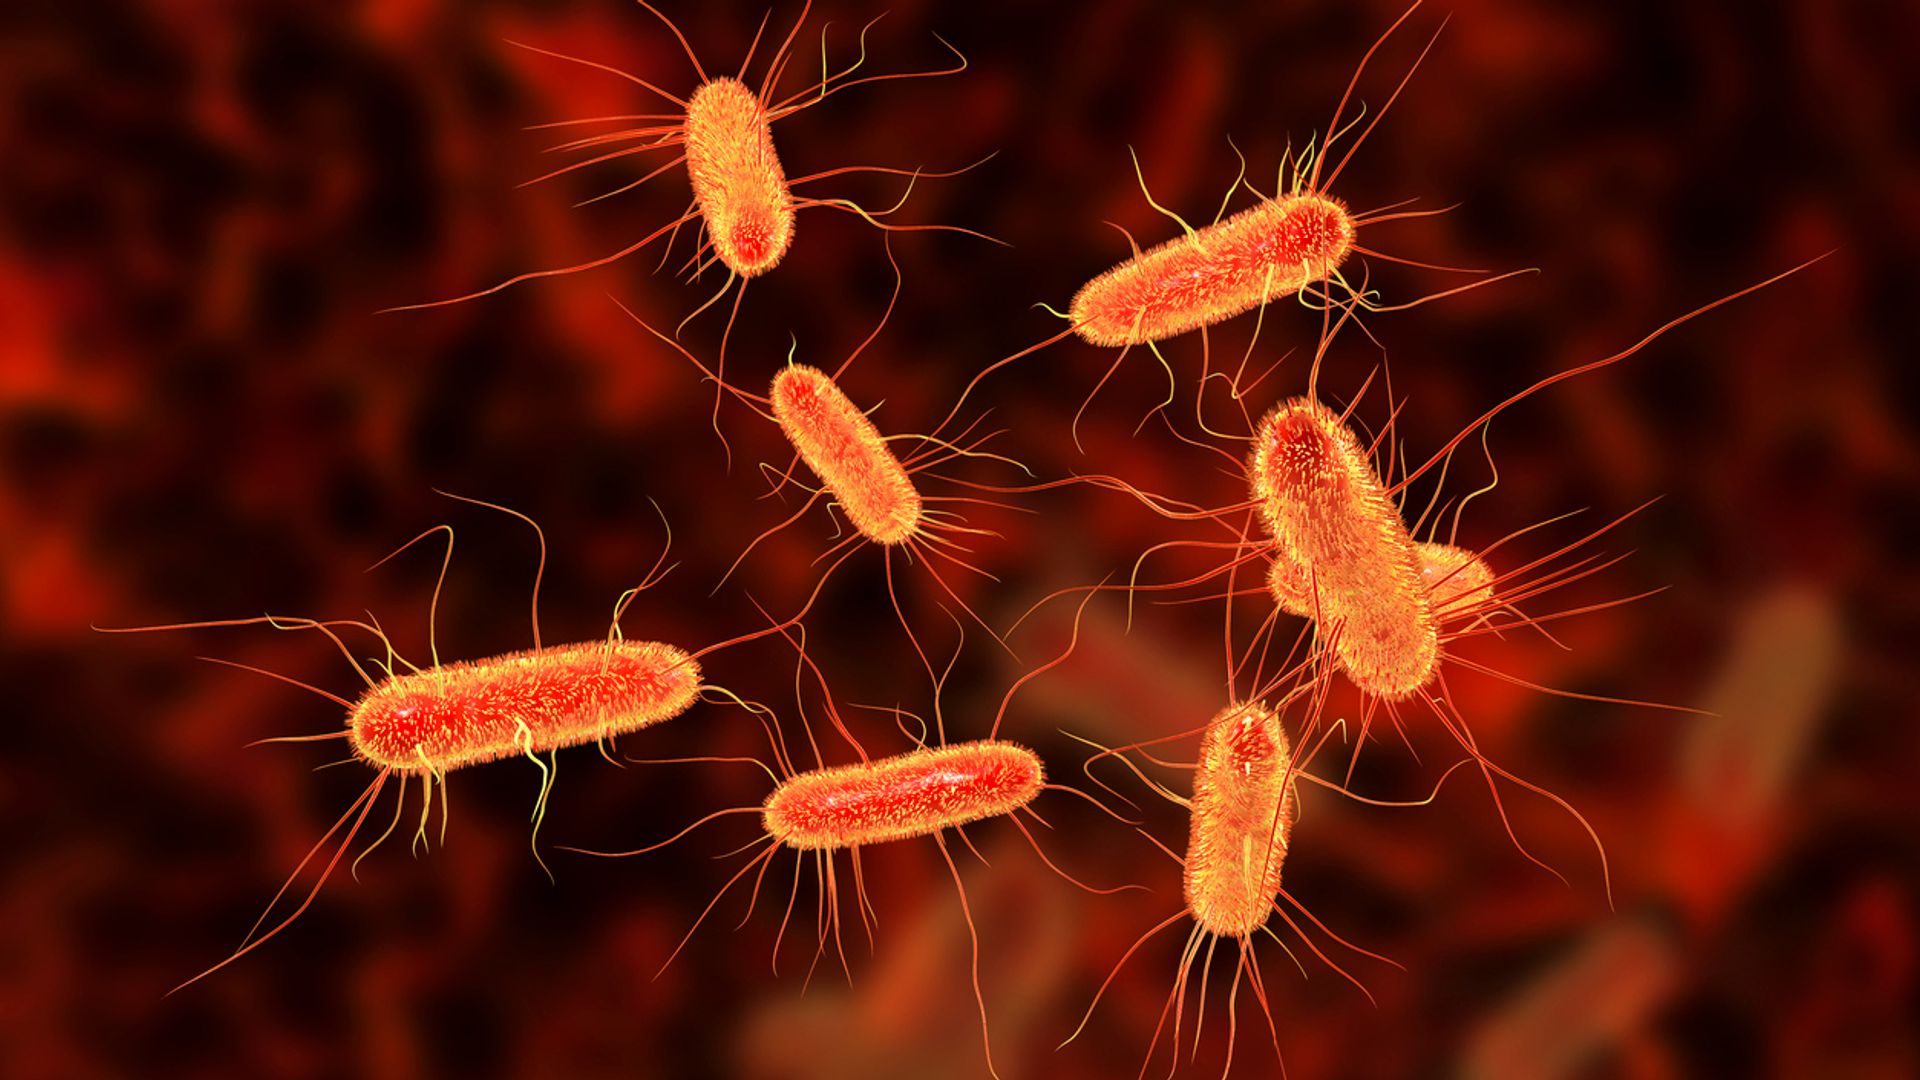 More than 80 people taken to hospital over E.coli outbreak